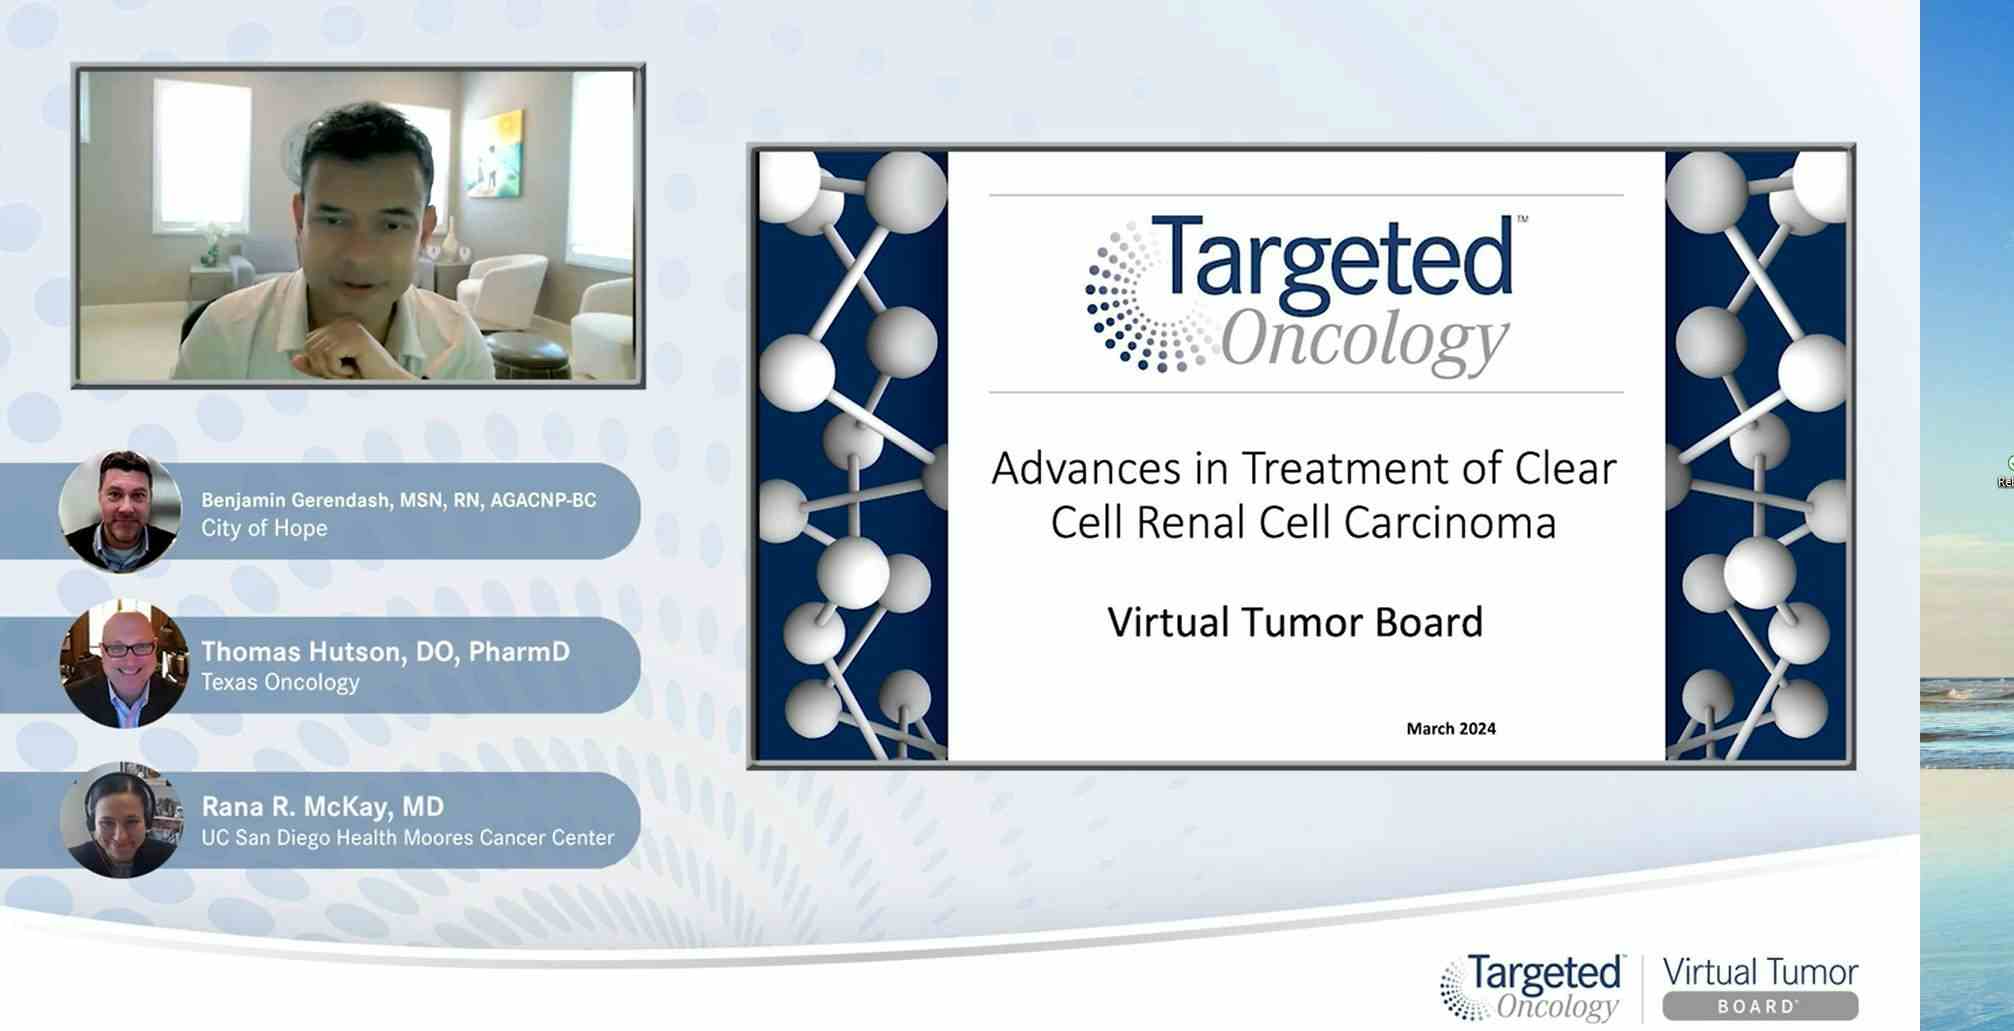 Video 11 - "Treating Patients With RCC Who Progress Following Adjuvant Therapy"